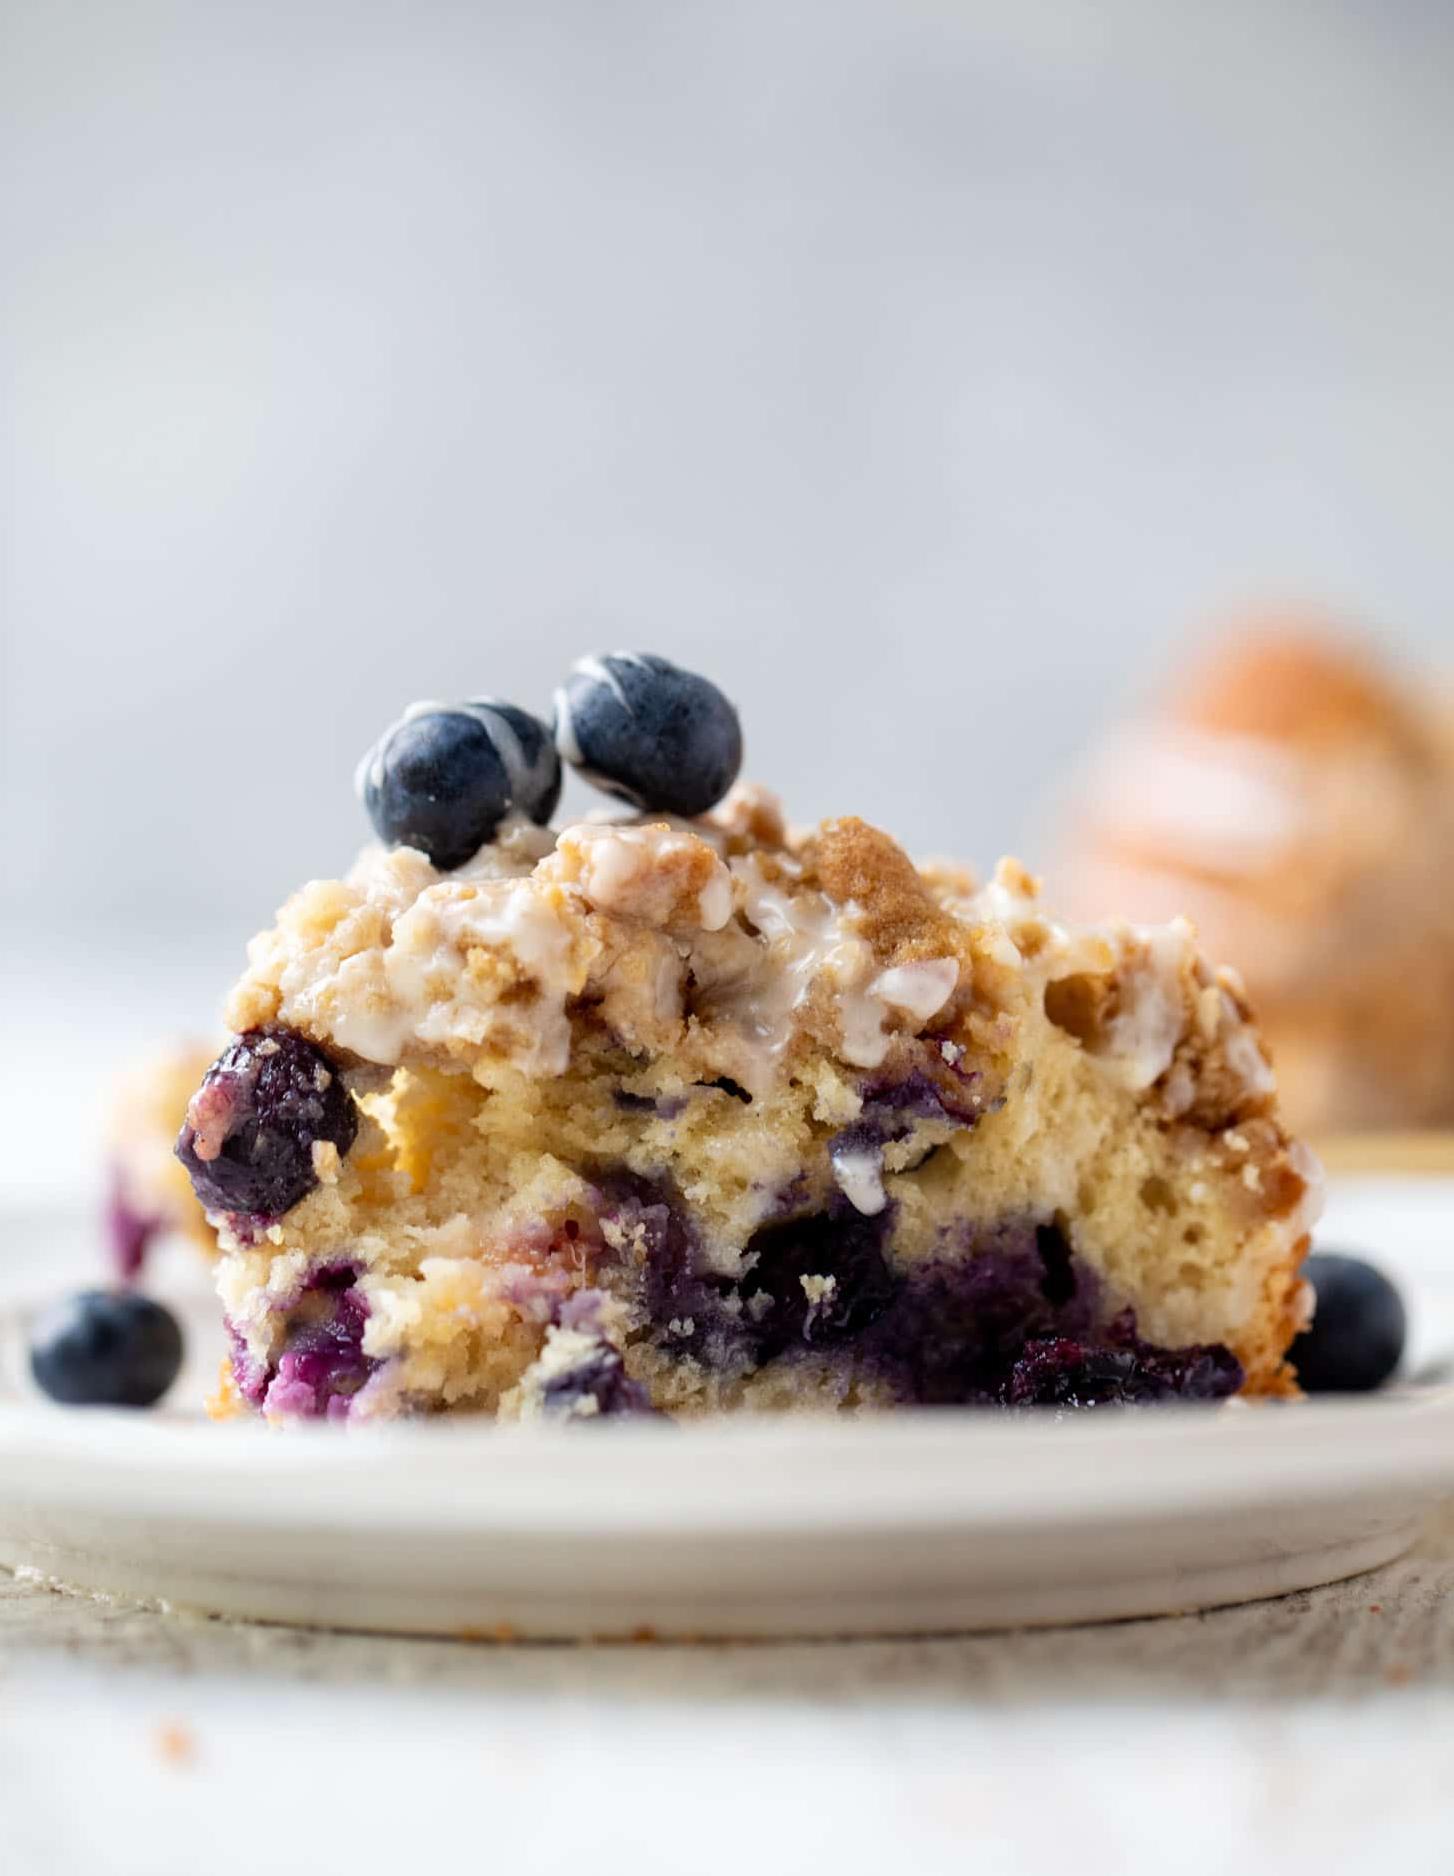  Swap out regular coffee cake for this unique and flavorful recipe for a breakfast or brunch treat.